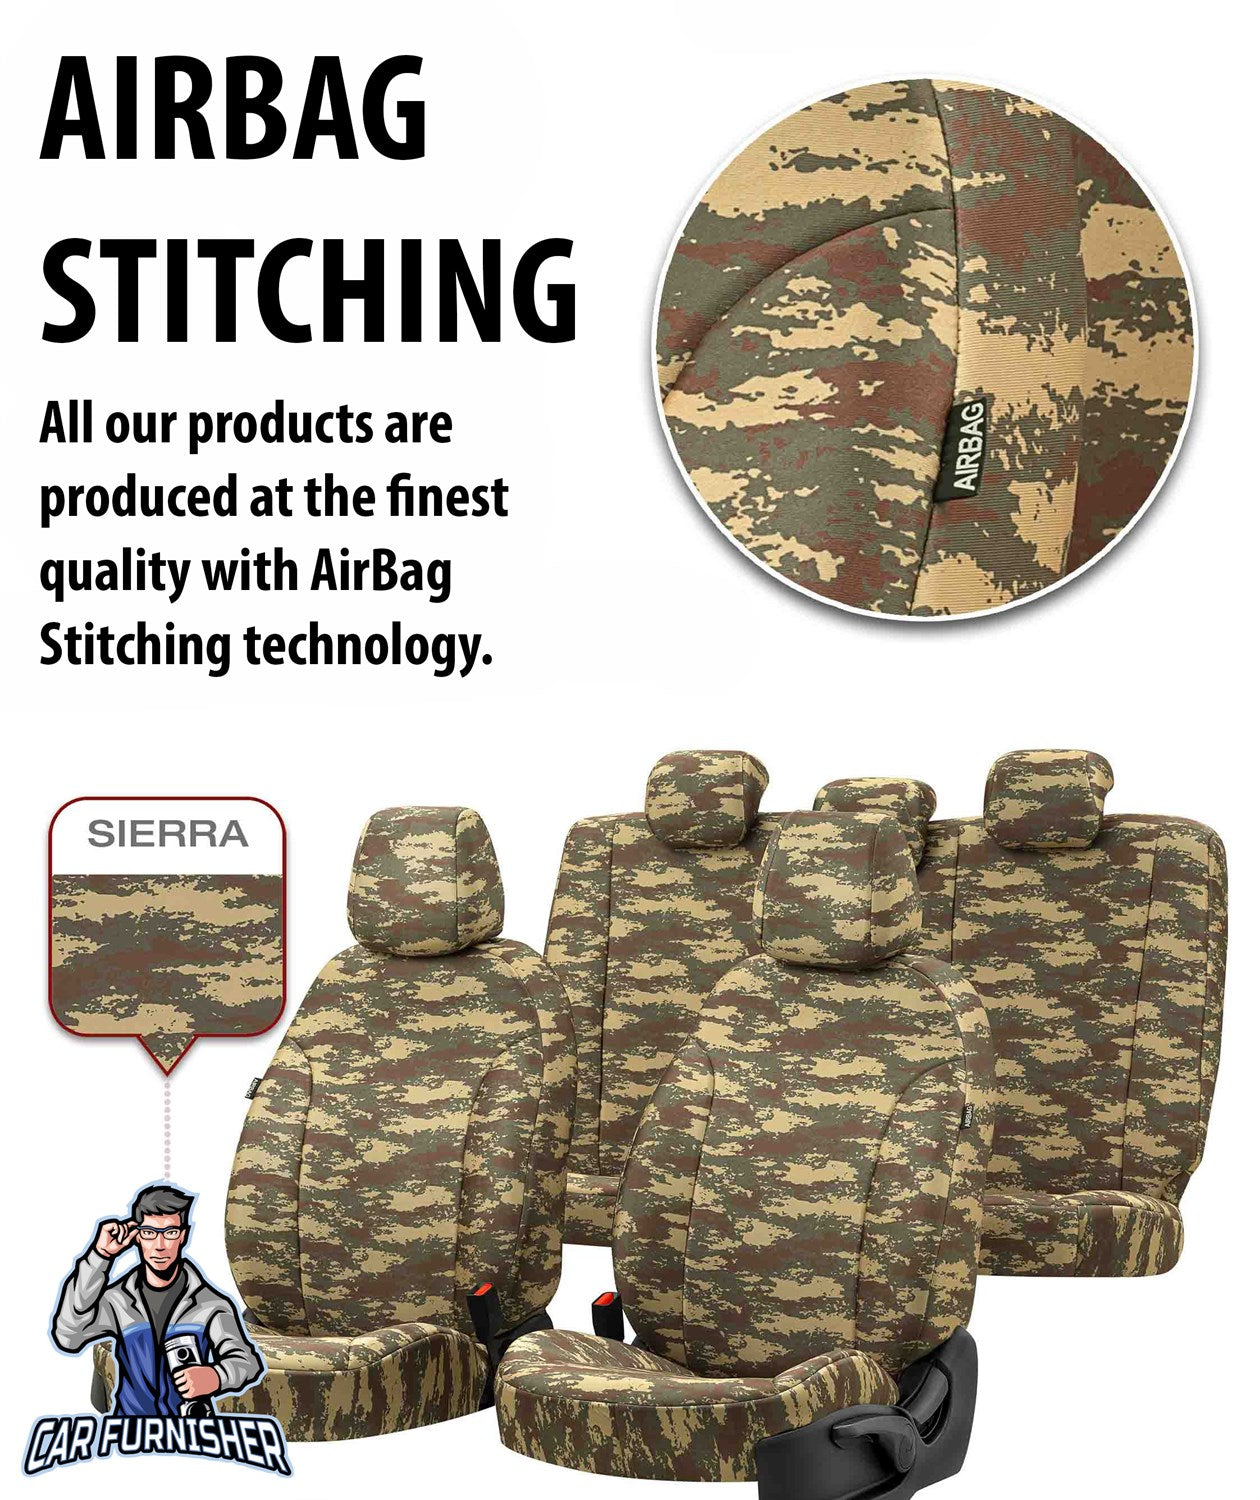 Mitsubishi Spacestar Seat Cover Camouflage Waterproof Design Montblanc Camo Waterproof Fabric